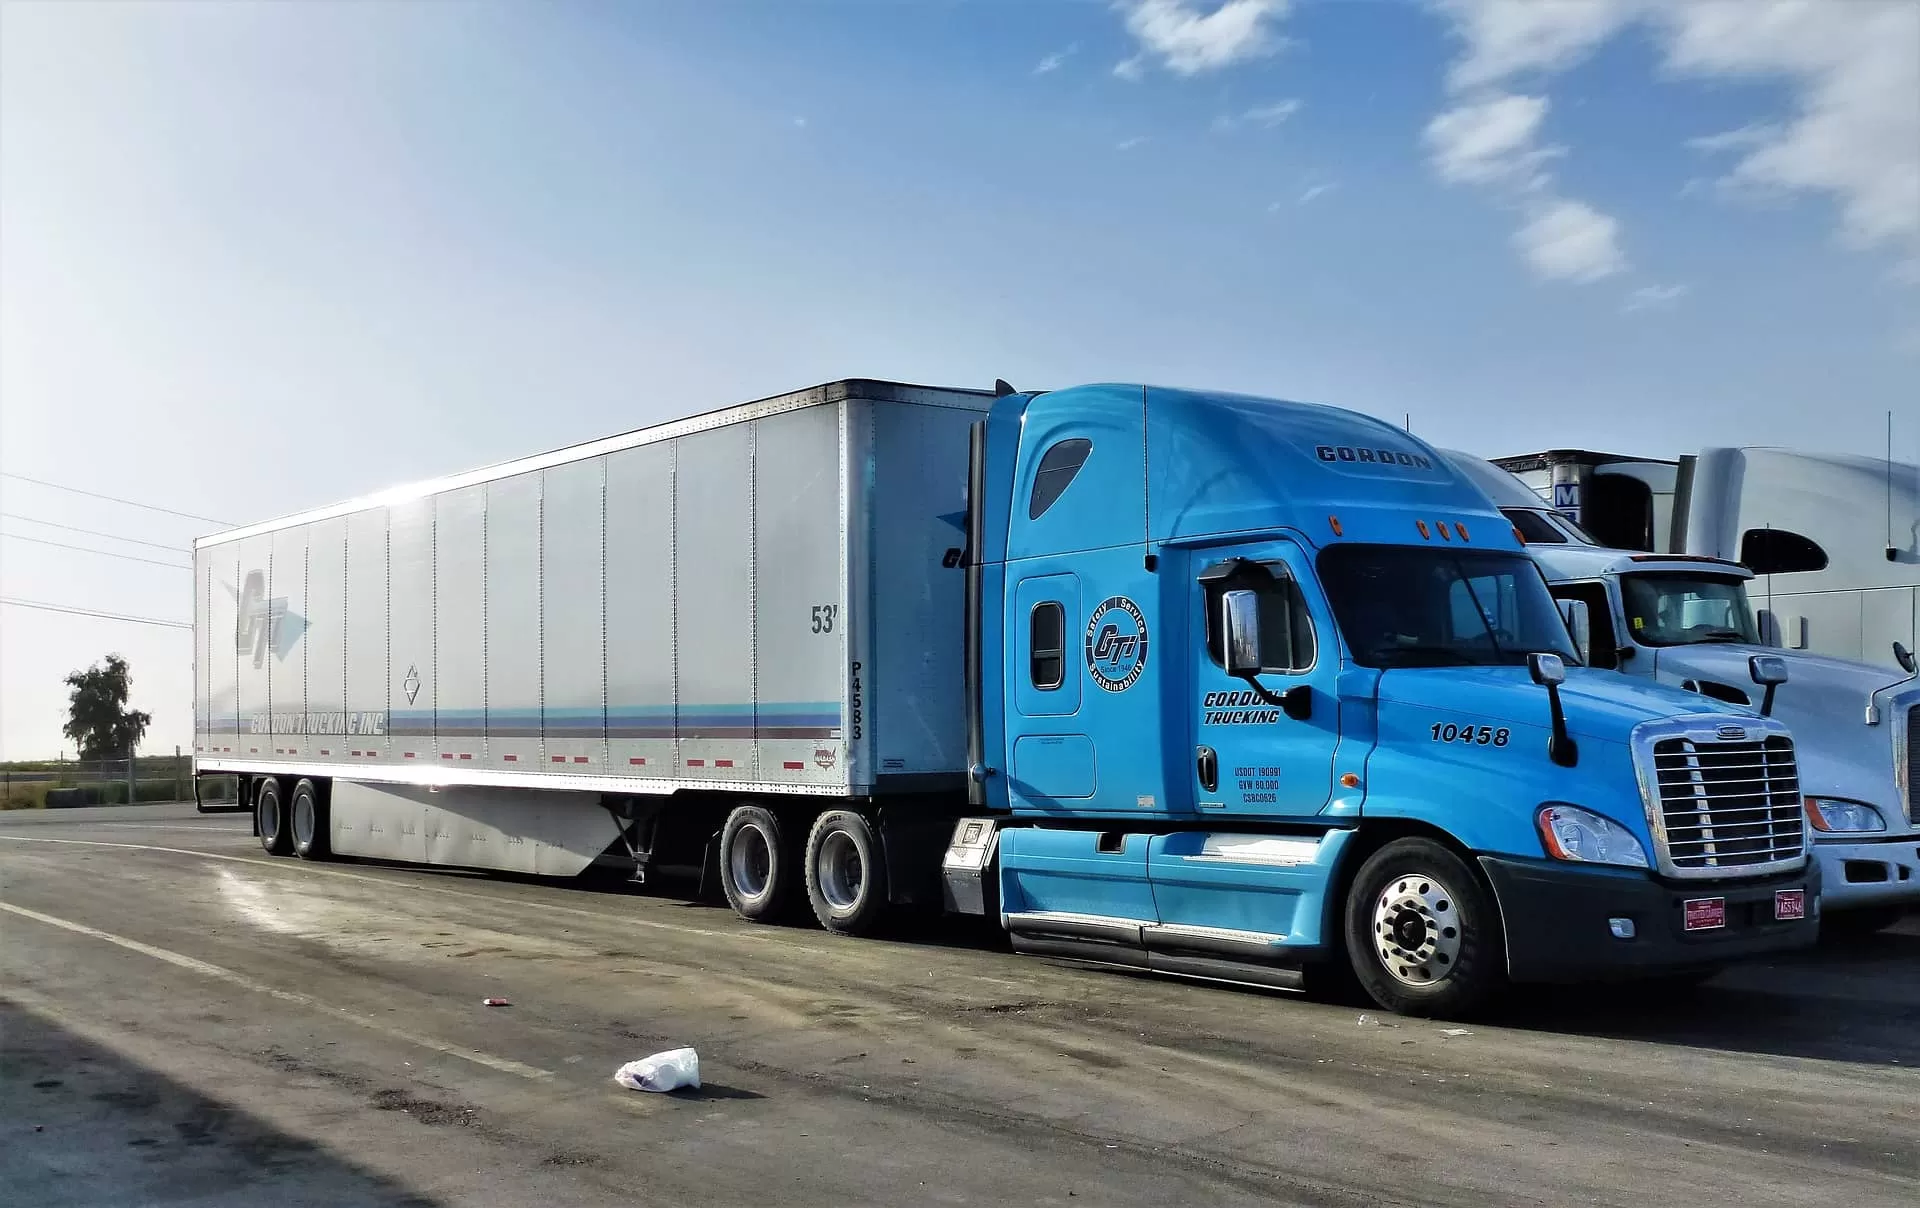 Blue Freightliner truck with trailer on the truck parking